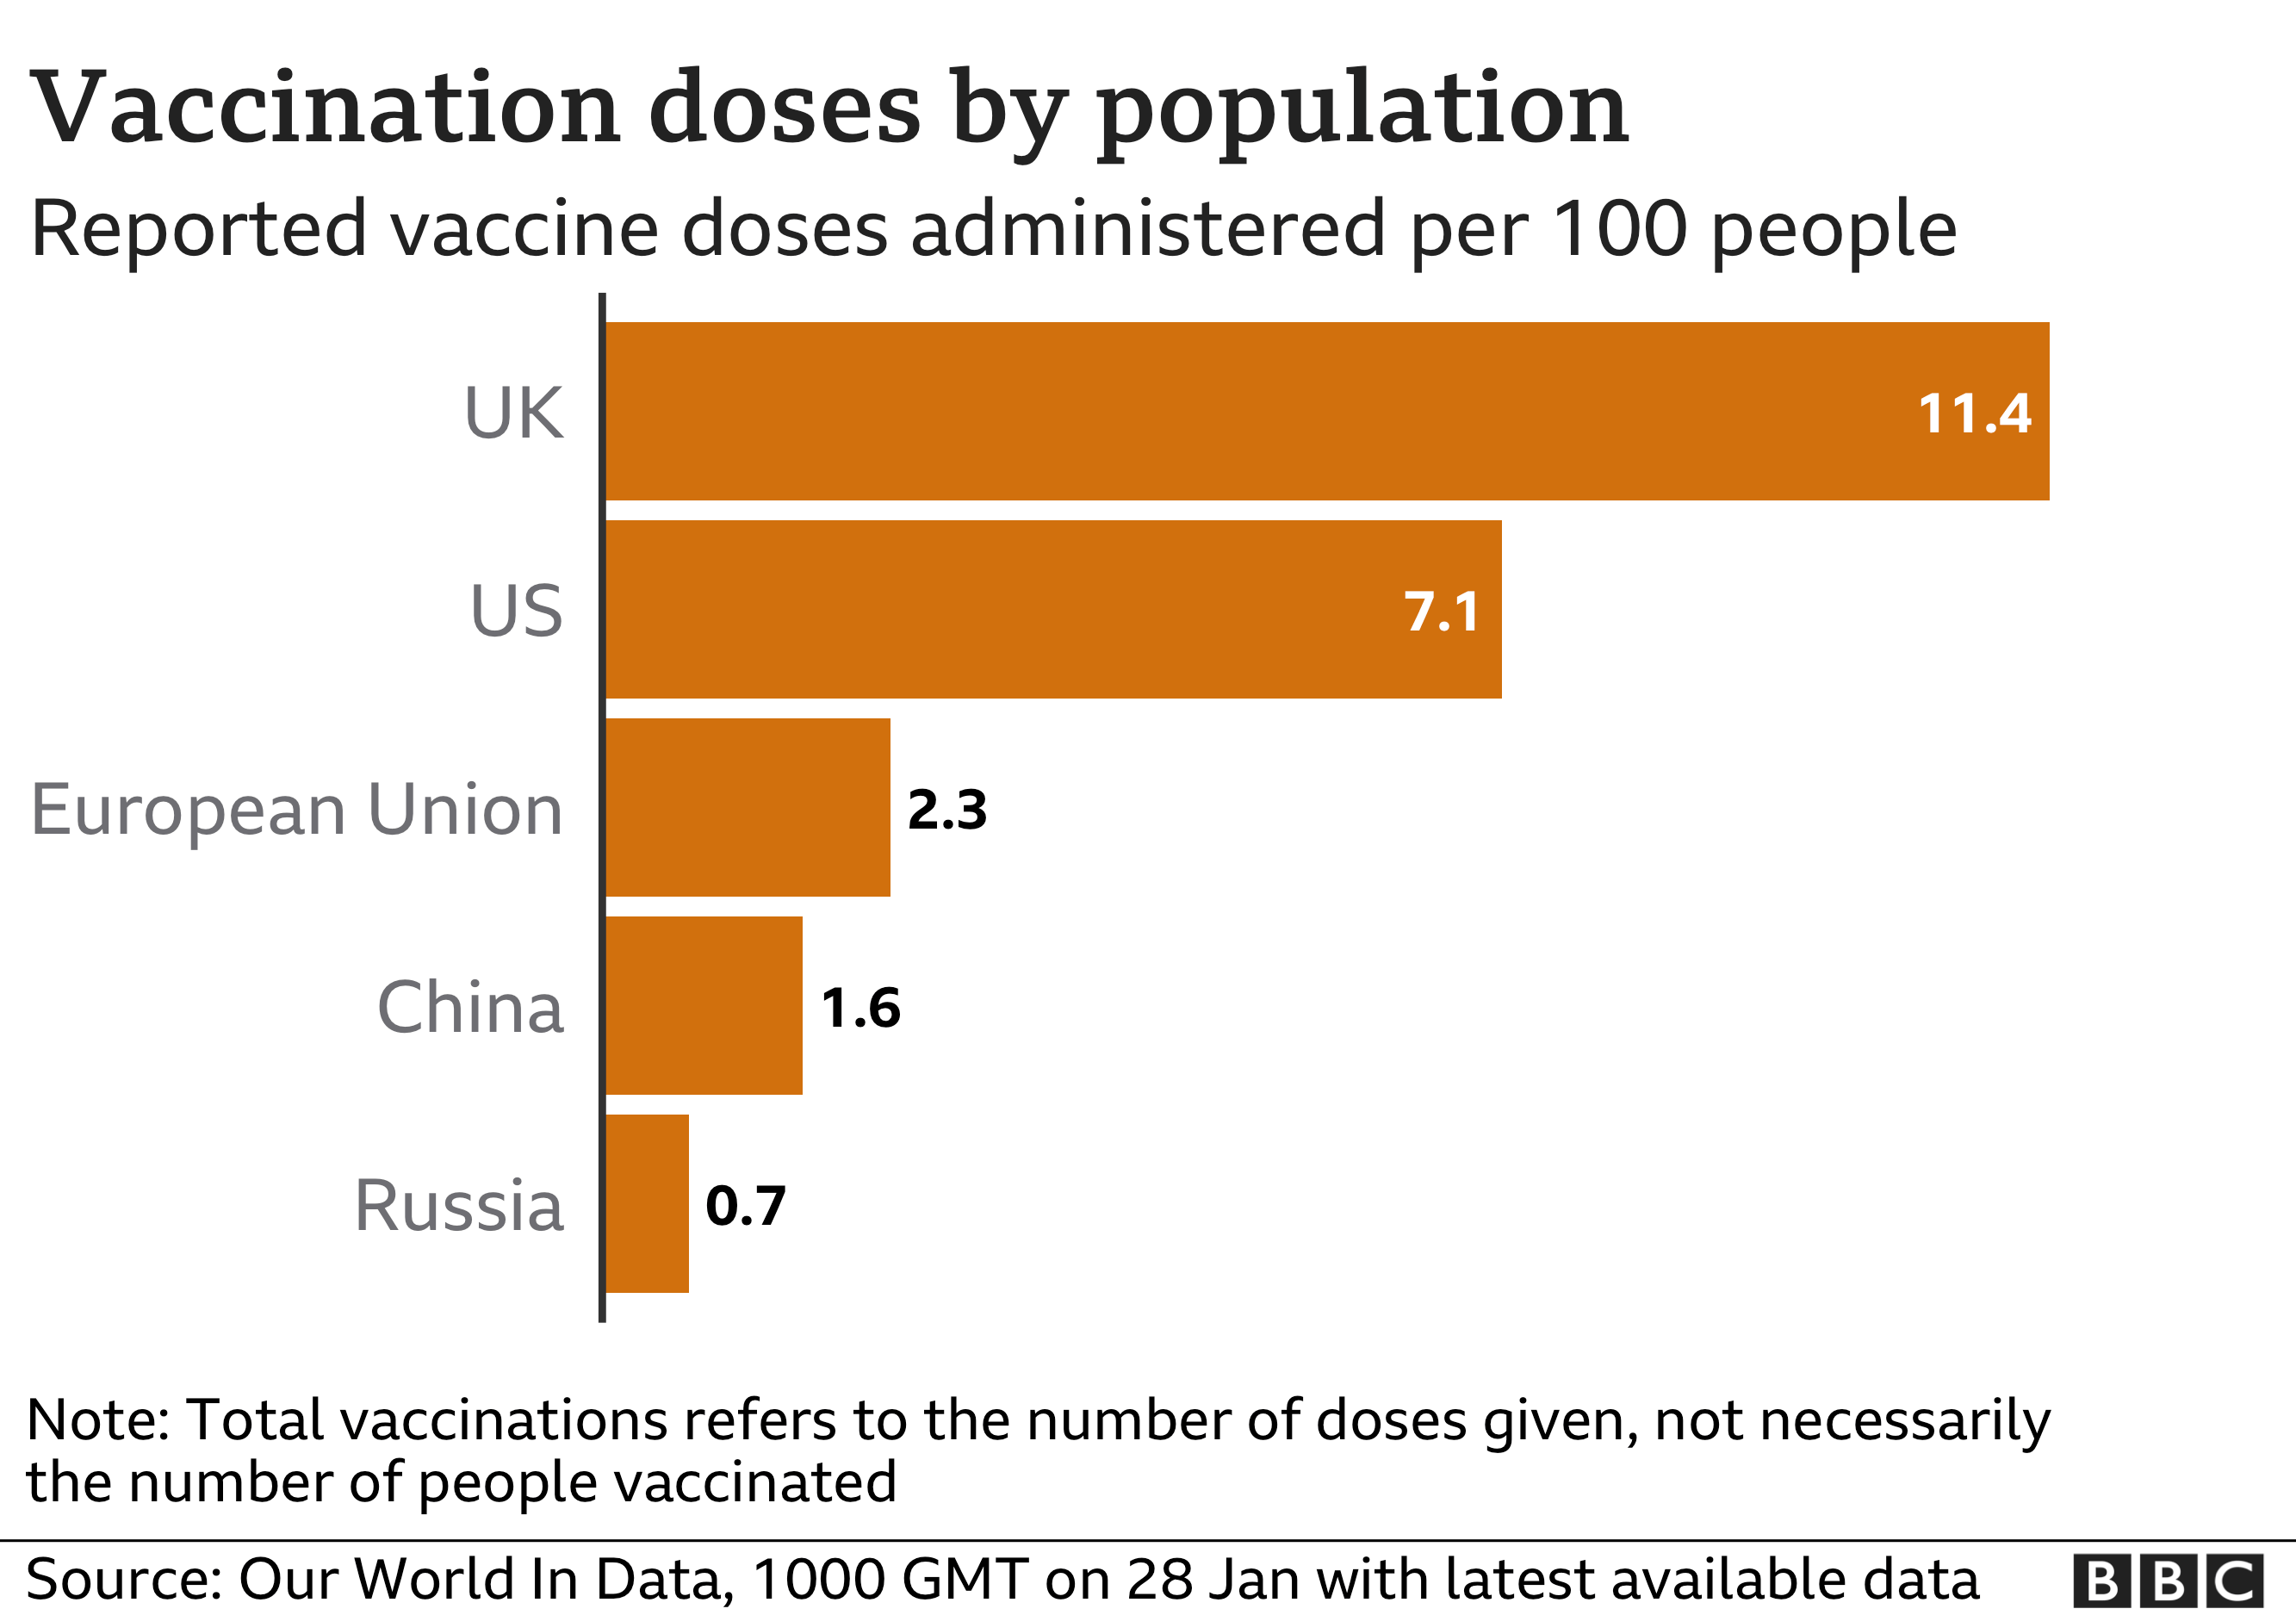 Bar chart comparison of vaccine doses per 100 million for UK, US, EU, China and Russia.